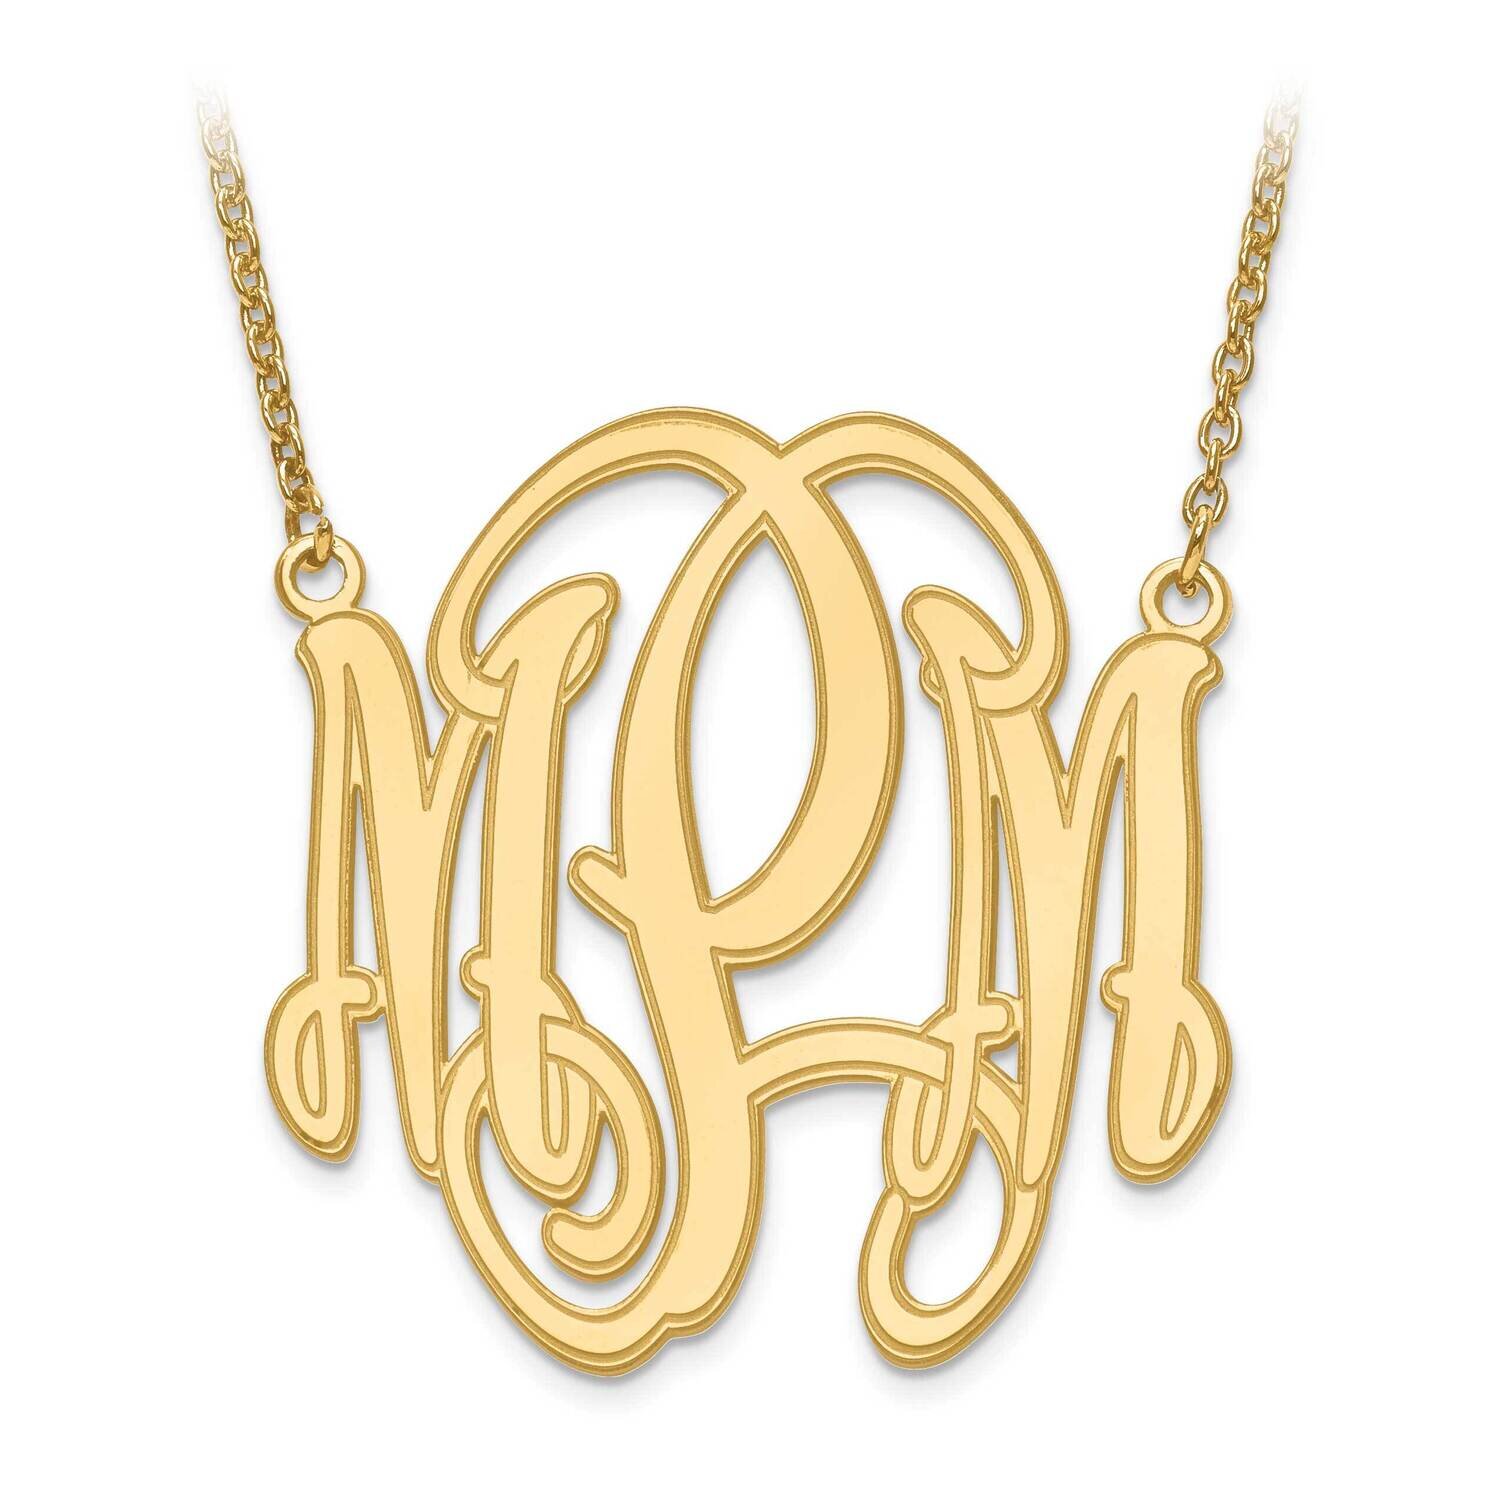 Circular Etched Outline Monogram Plate with Chain Gold-plated Silver XNA554GP